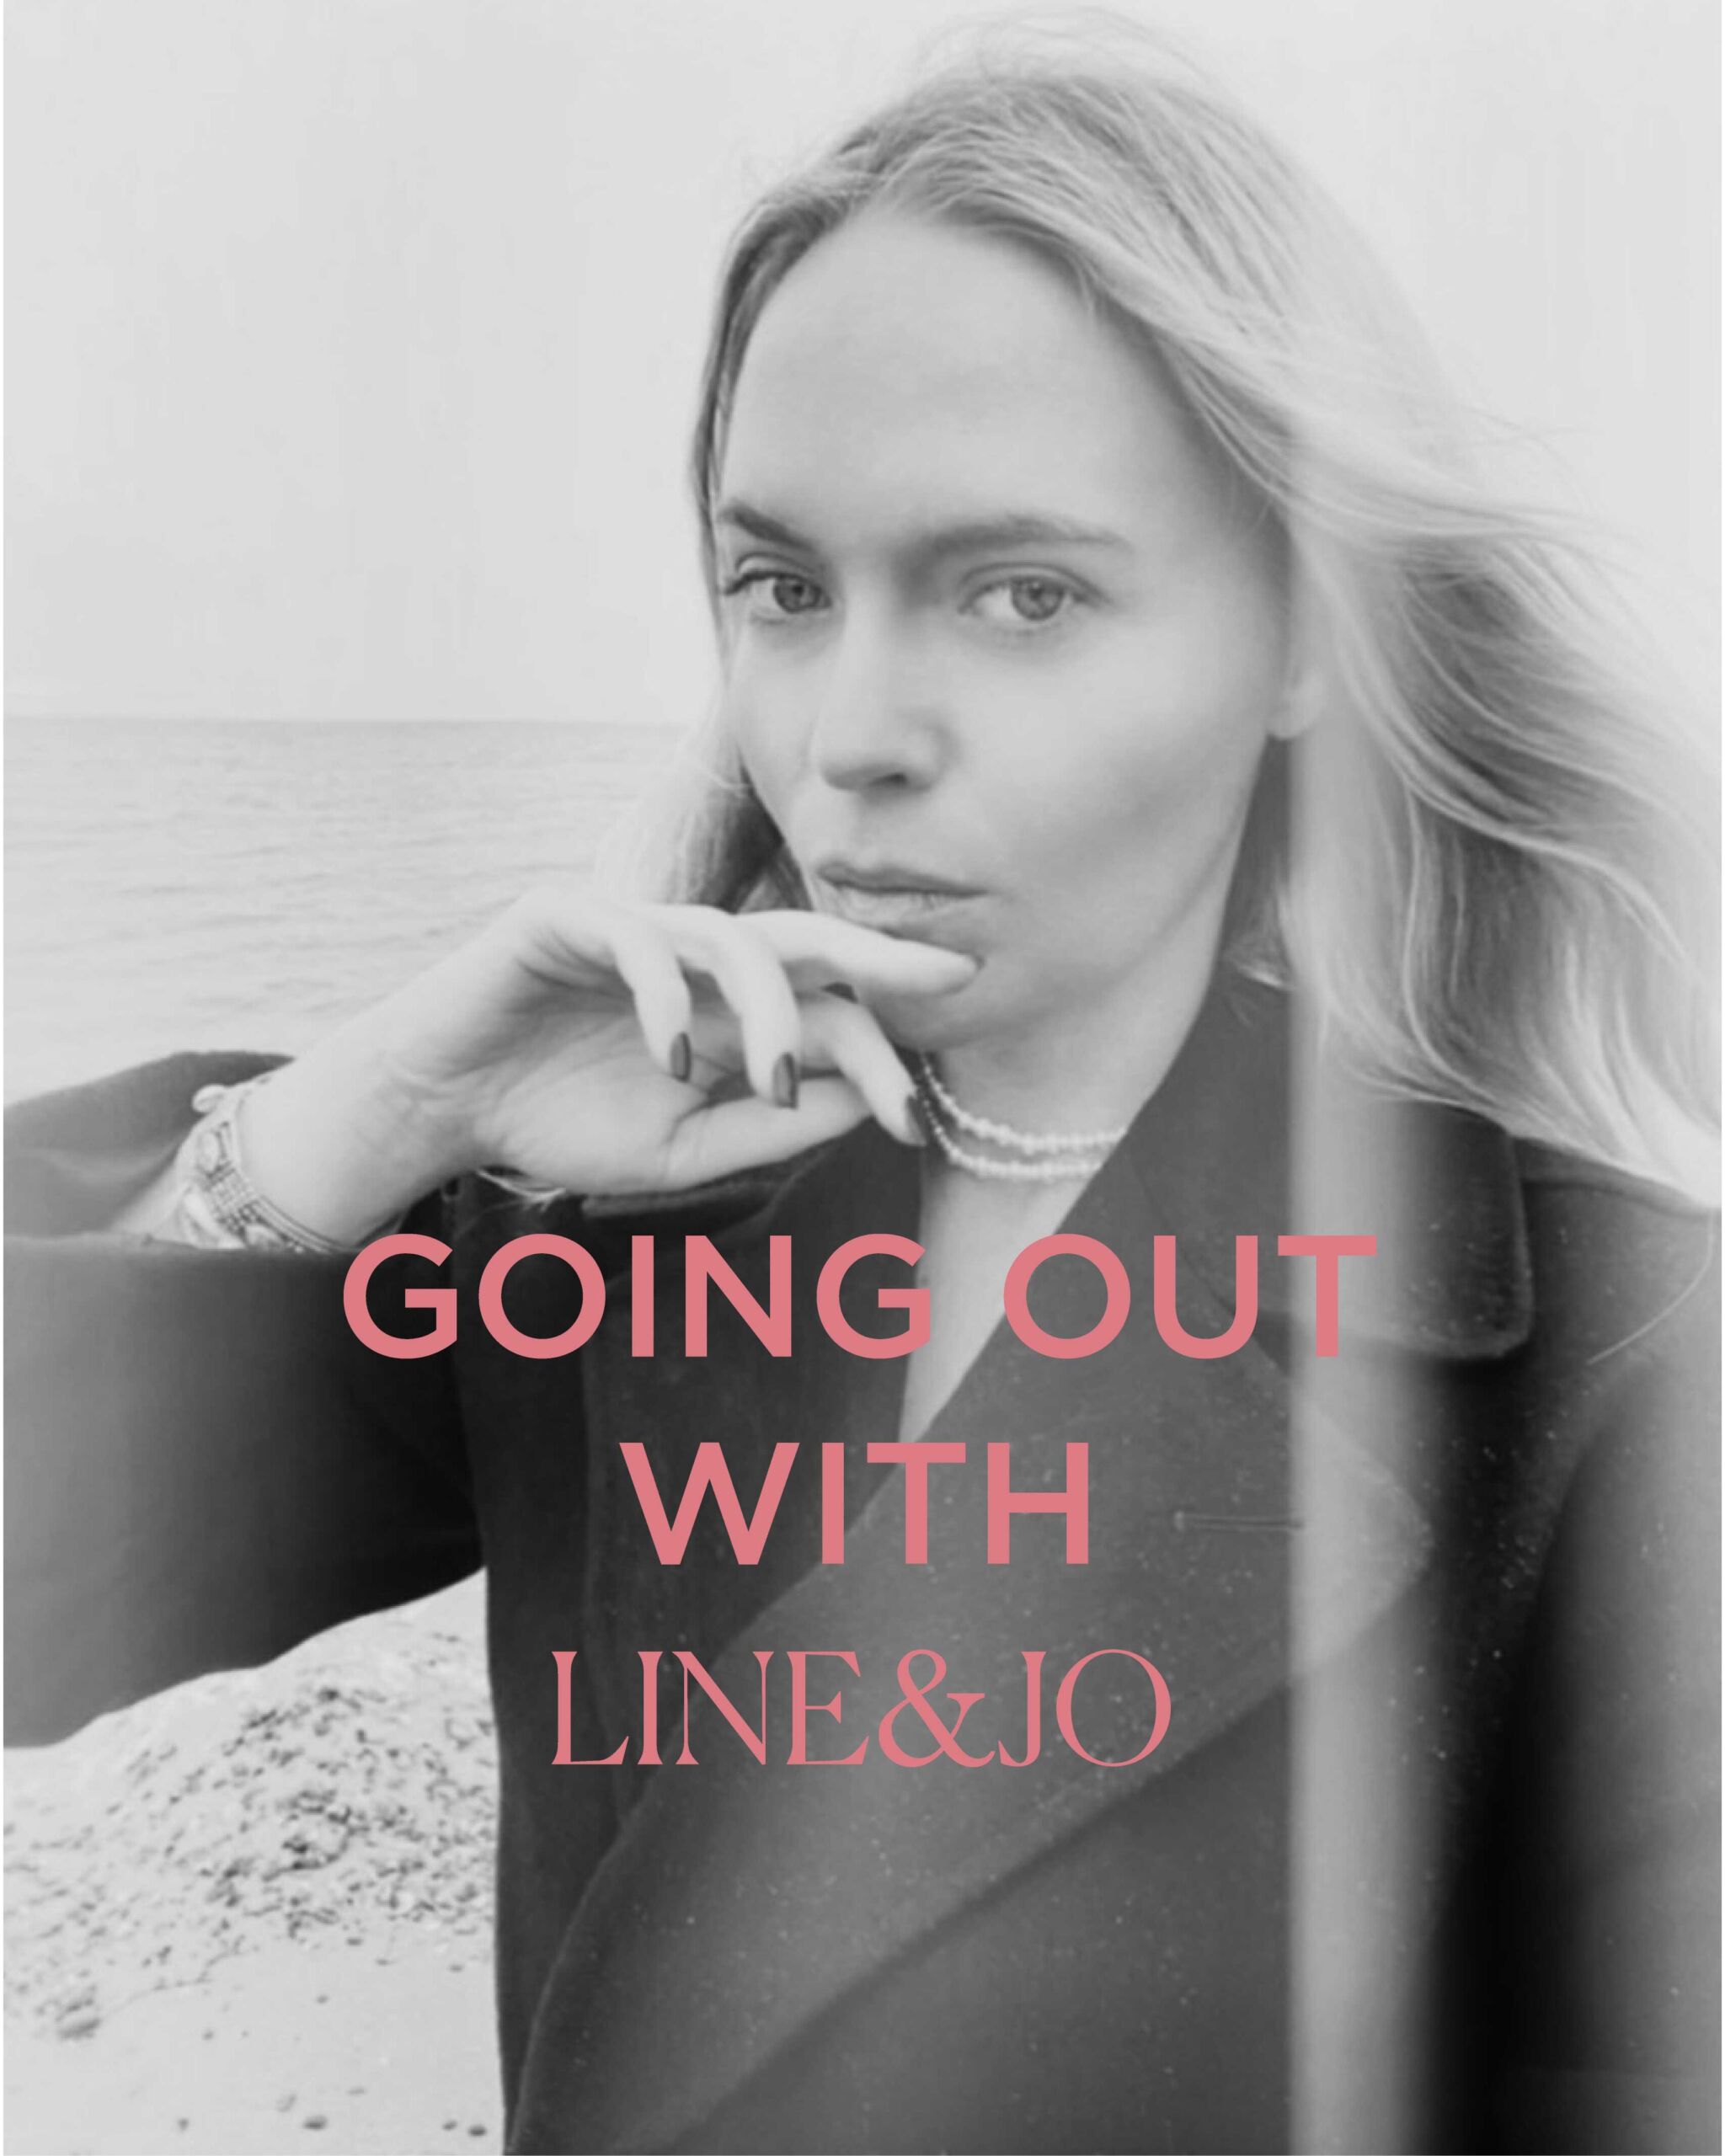 Going out with LINE&JO: Dorothea Gundtoft